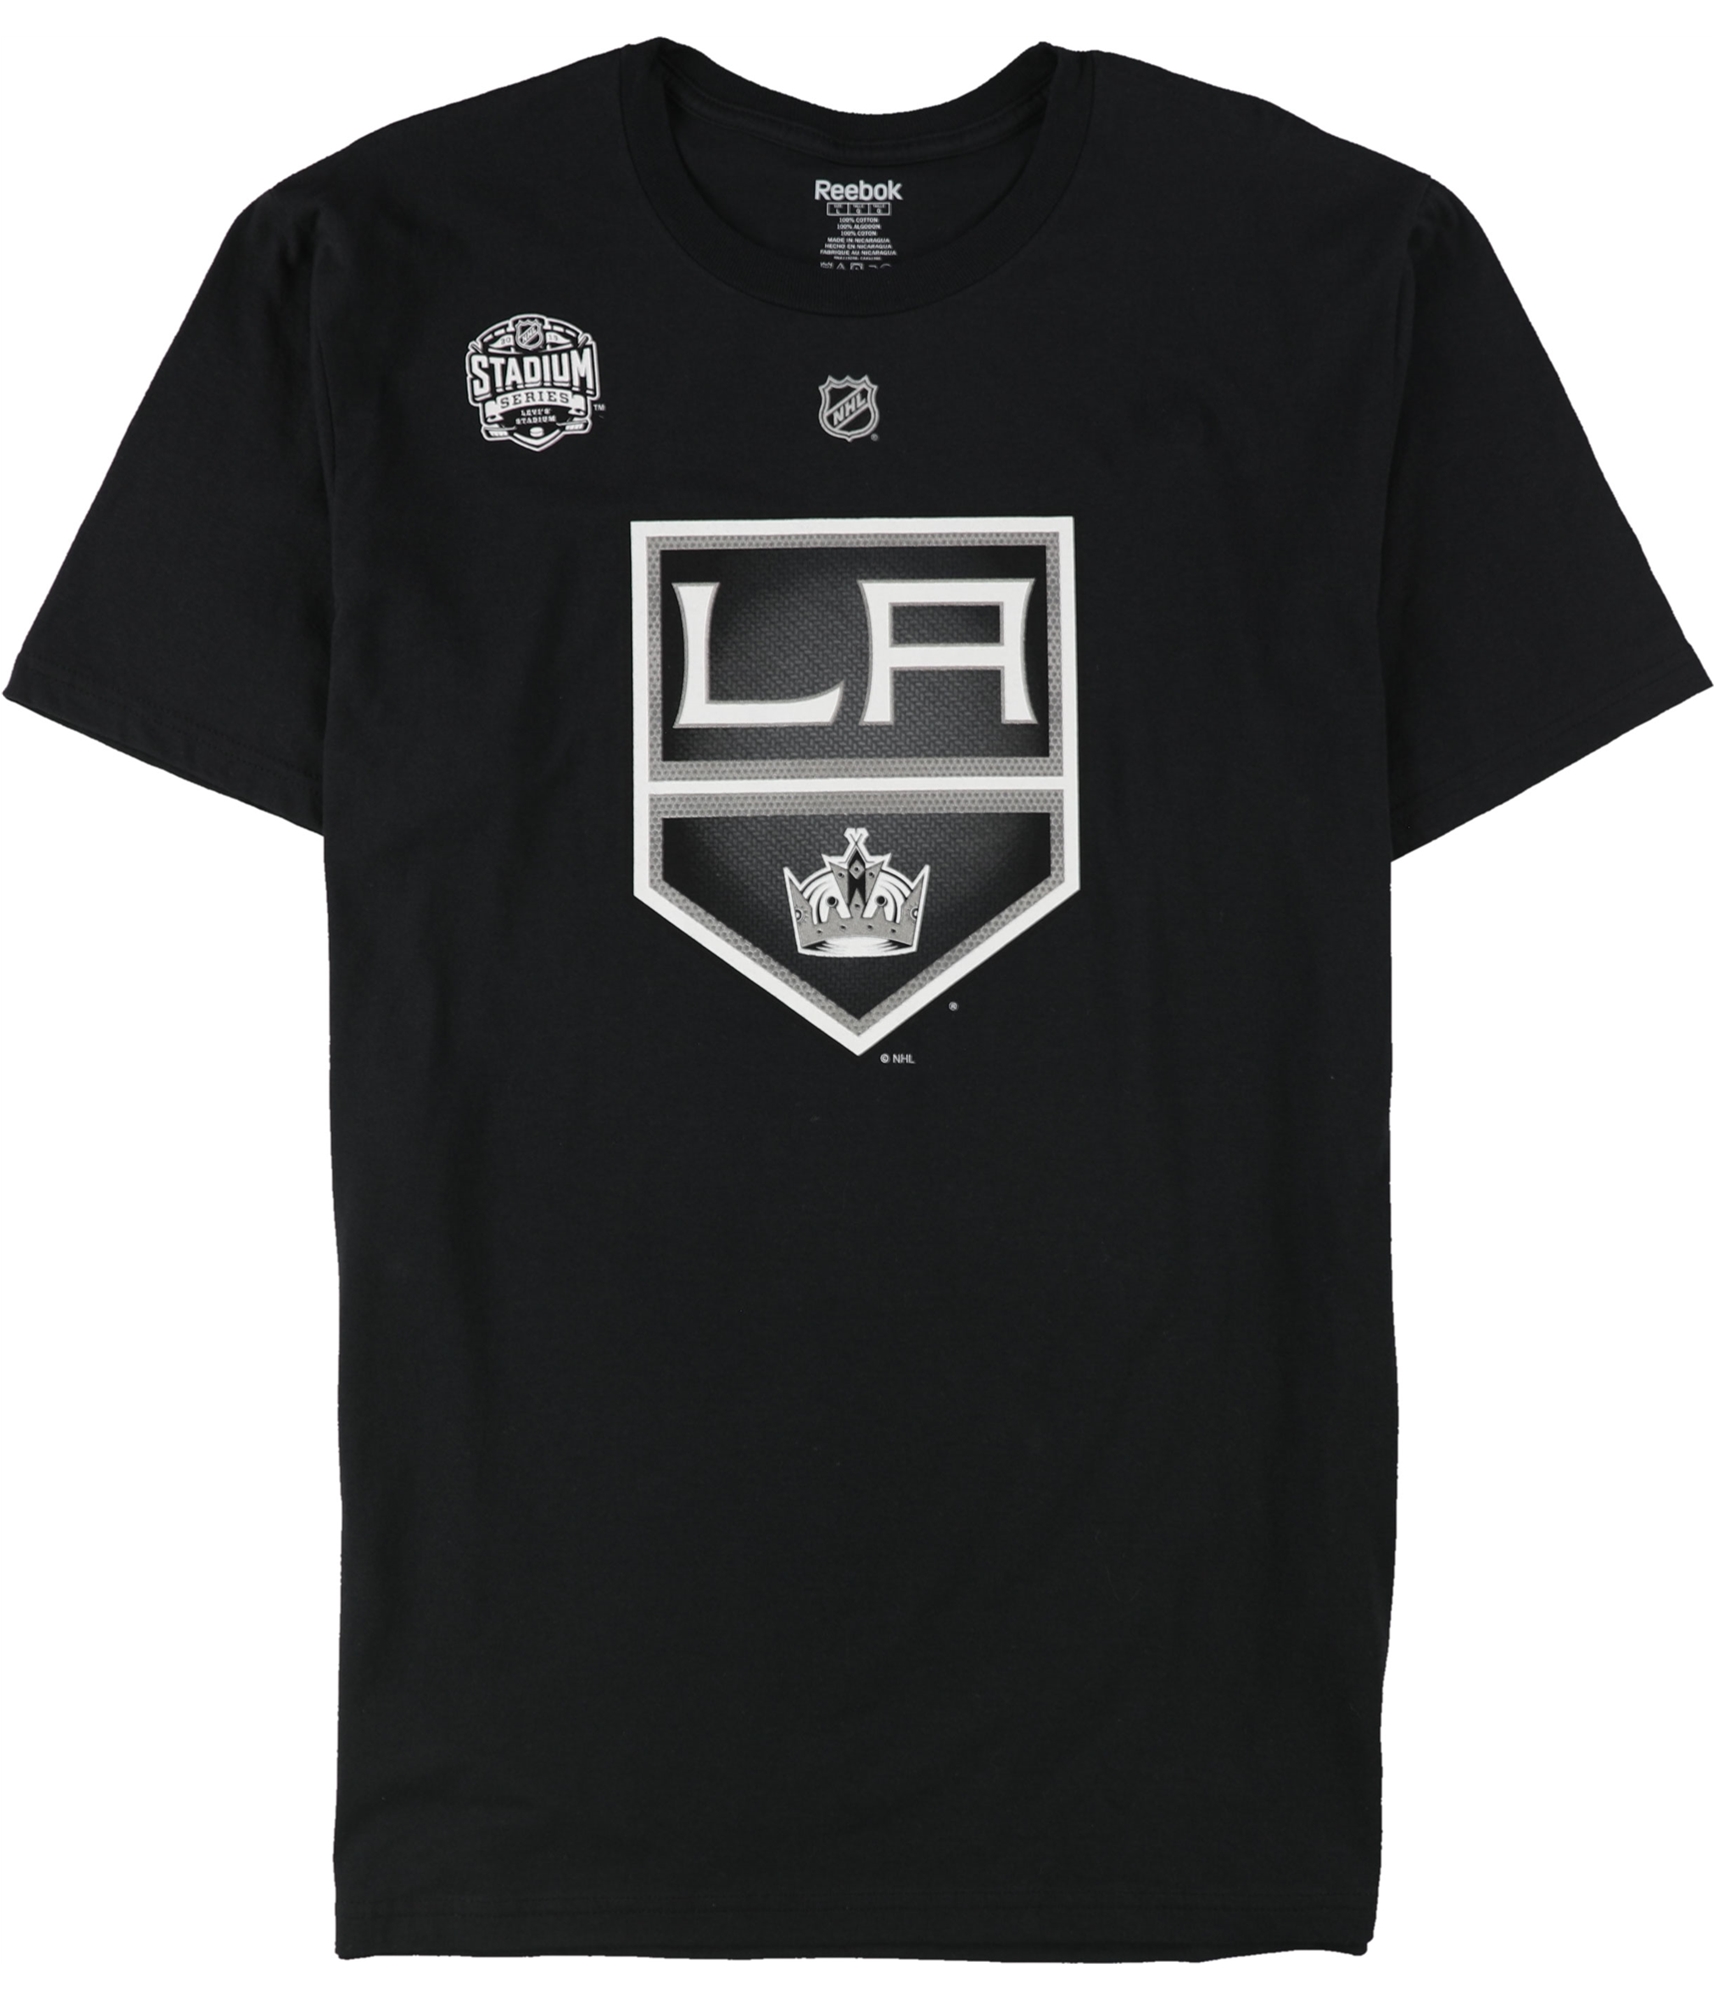 Selected Color is doughty8